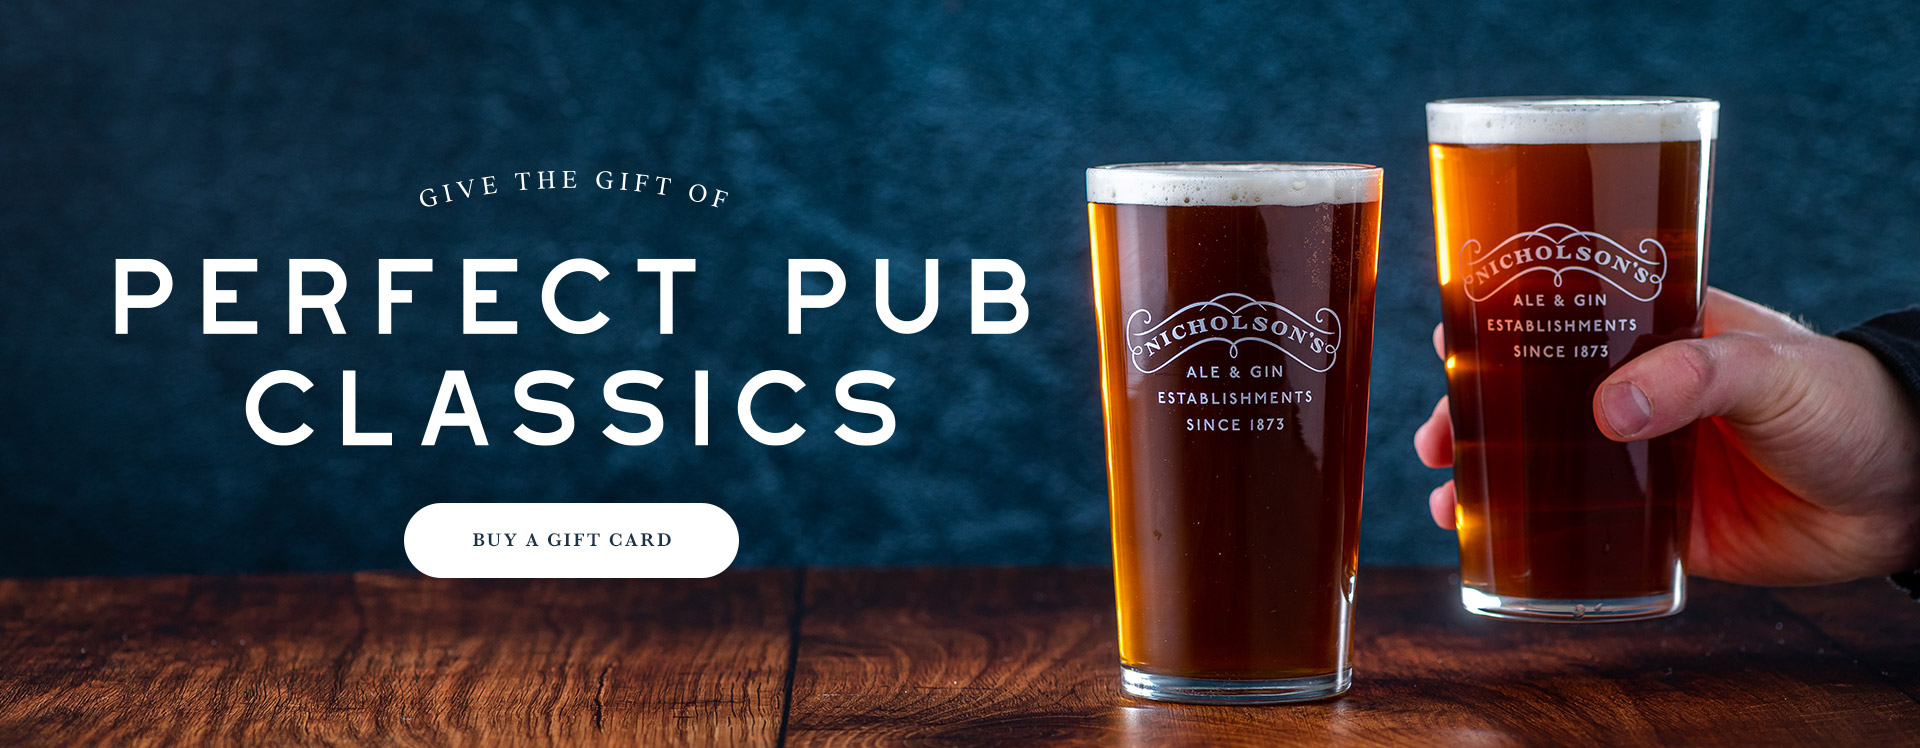 Nicholson’s Pub Gift Voucher at The Bear and Staff in London